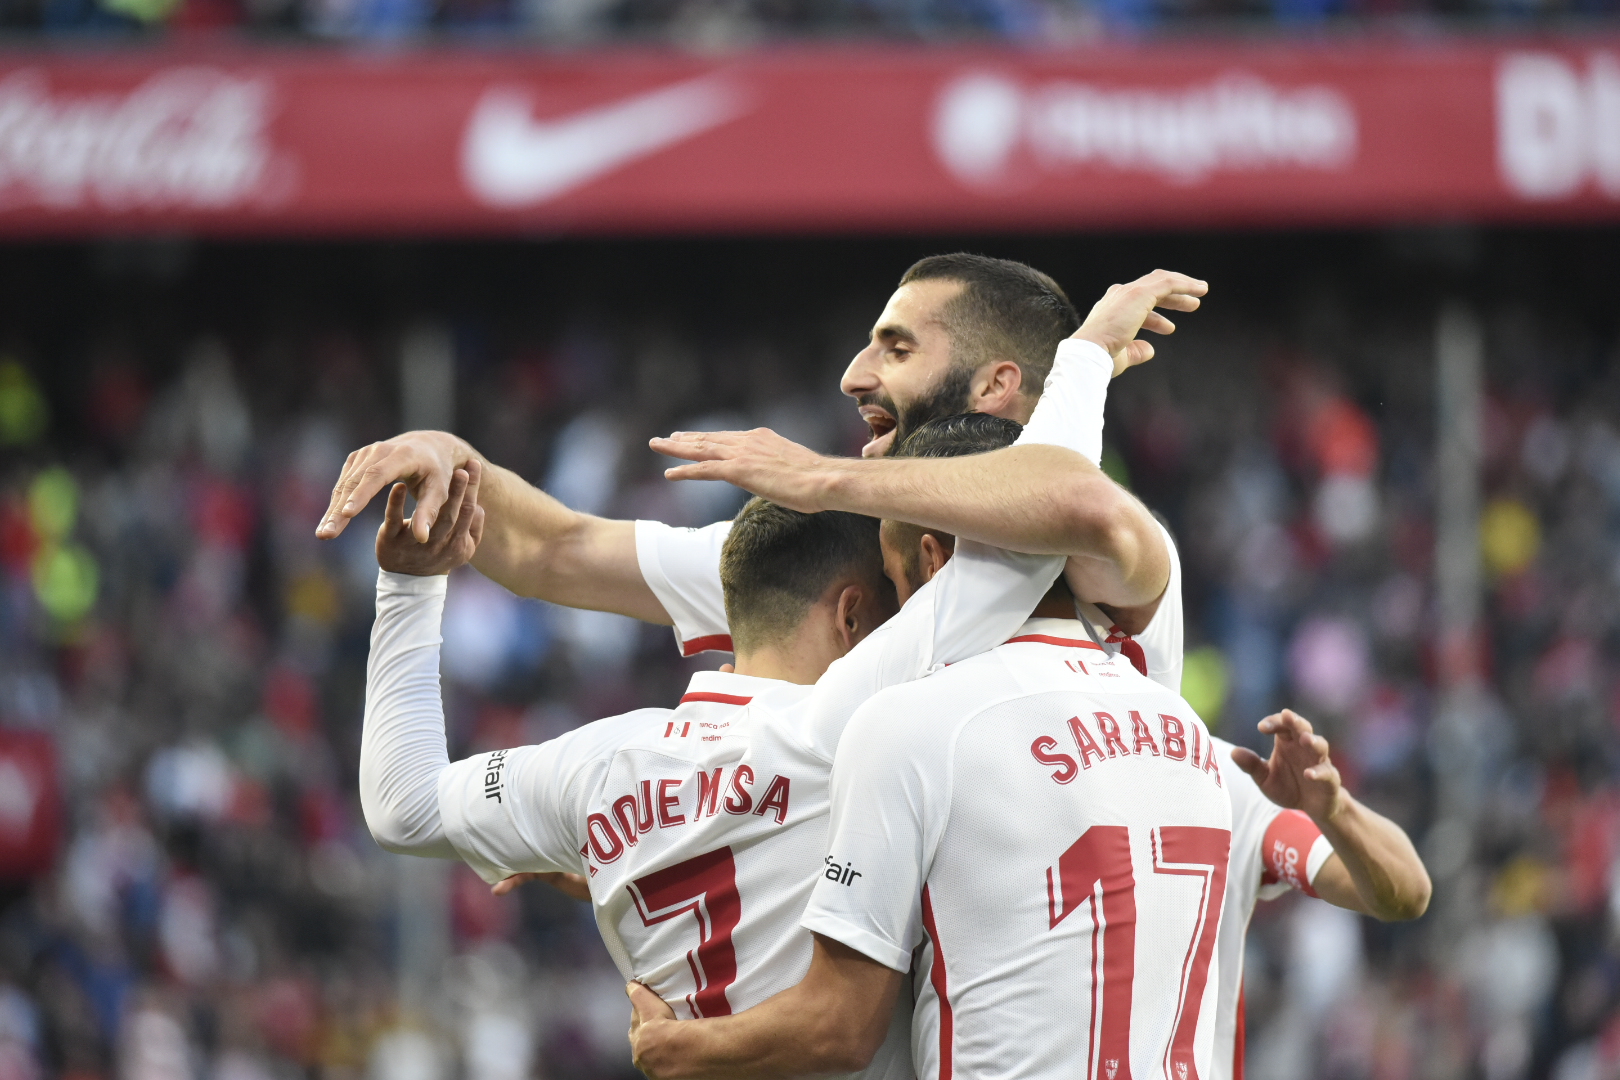 Sevilla's players celebrate the win against Alavés